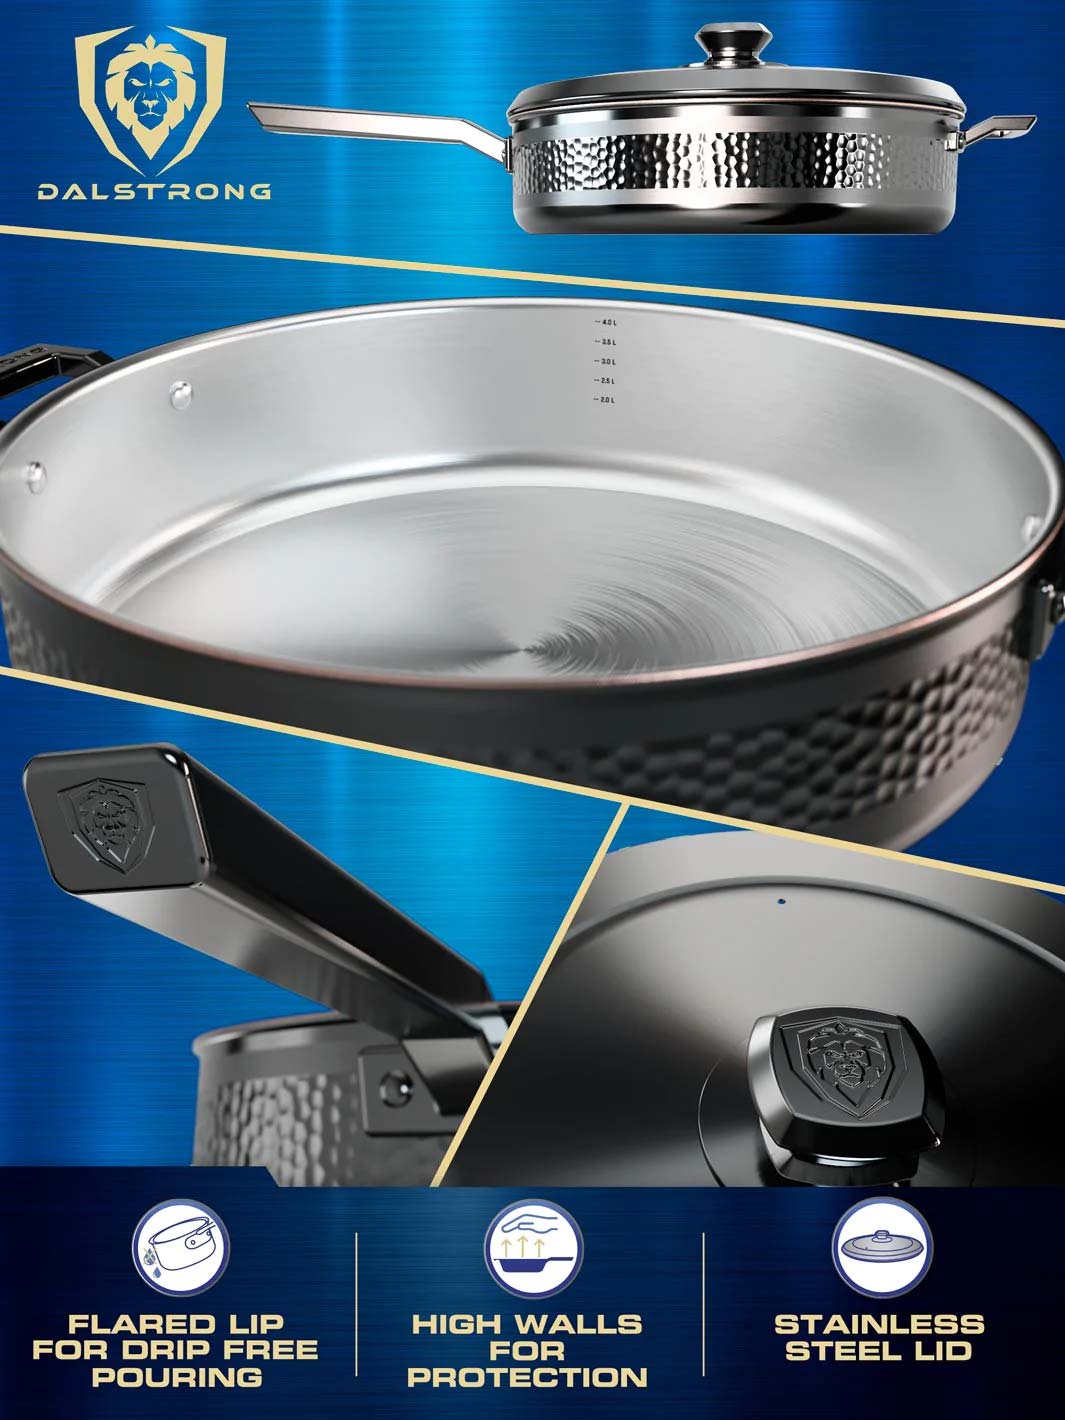 Dalstrong avalon series 12 inch hammered finish black frying pan showcasing it's high walls and stainless steel lid.